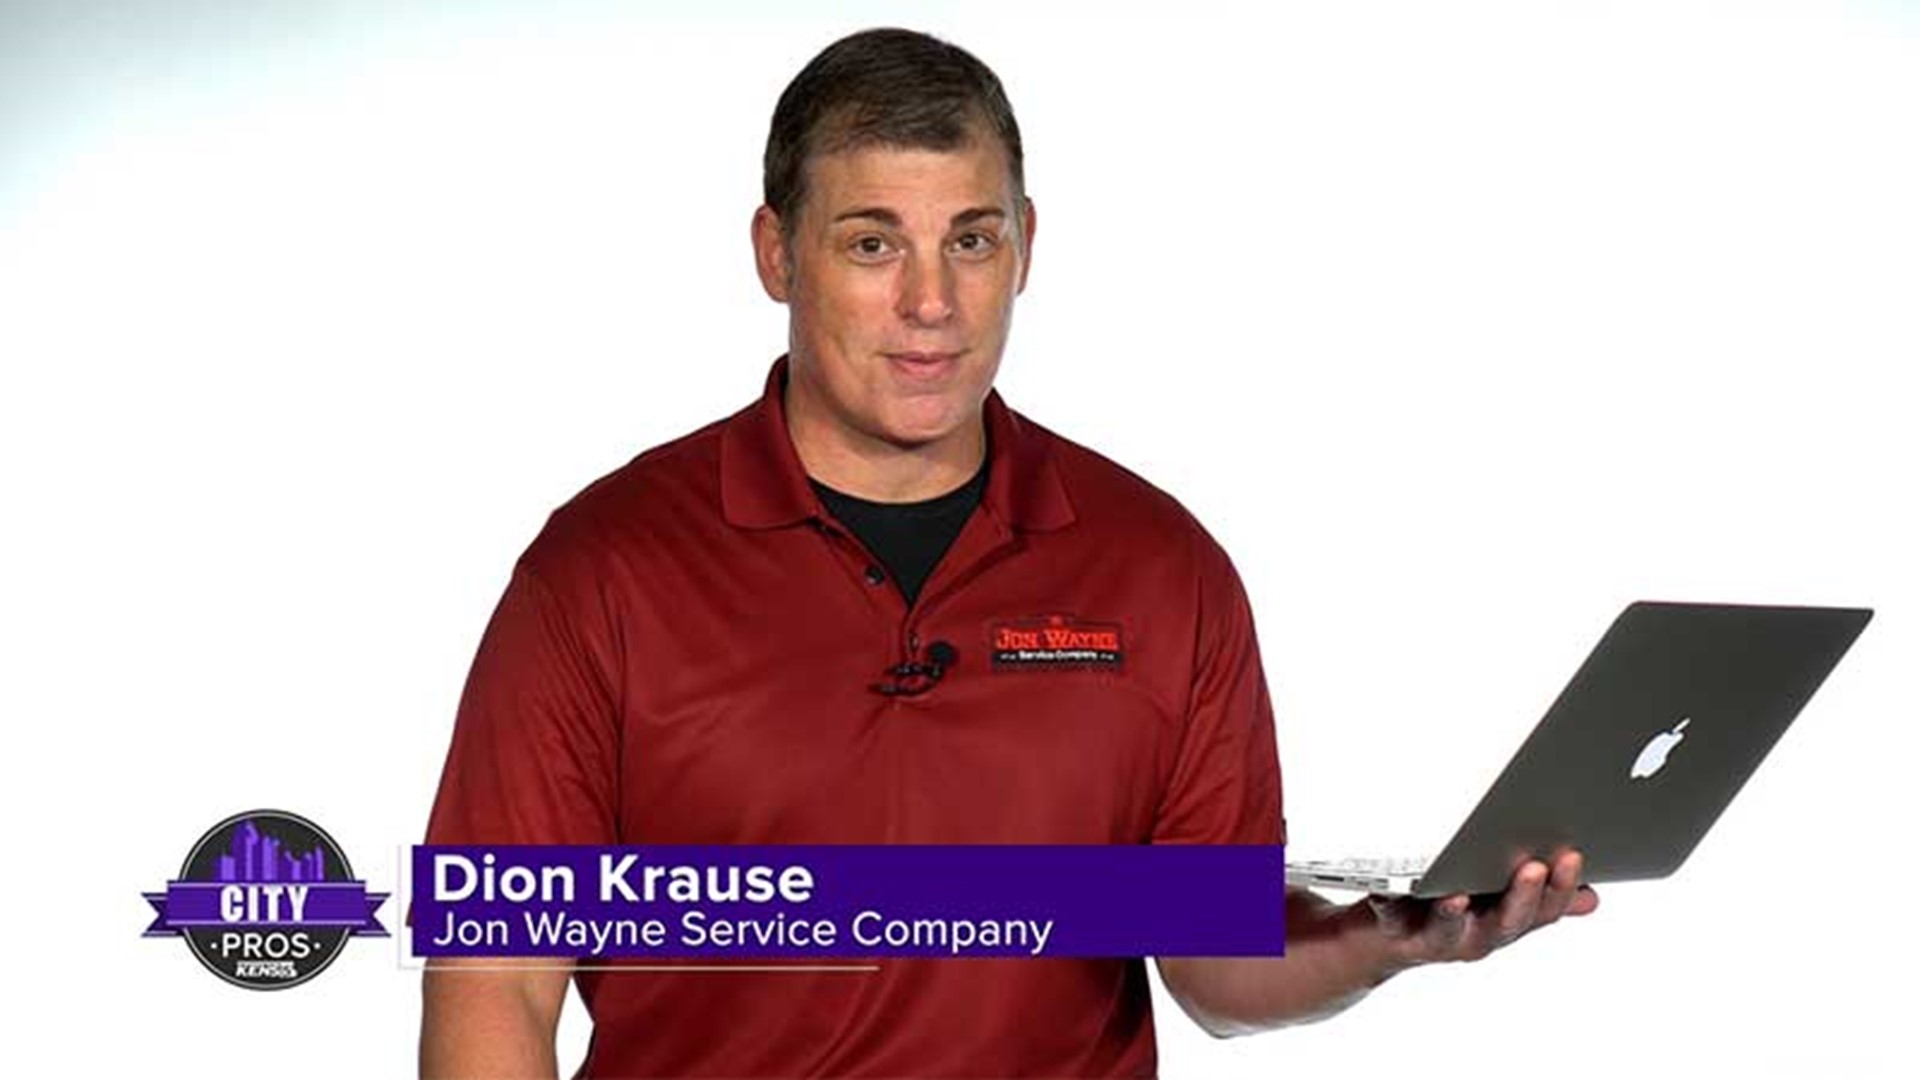 What's a connected-protected water kit? Jon Wayne can install sensors designed to protect your home from internal water damage.